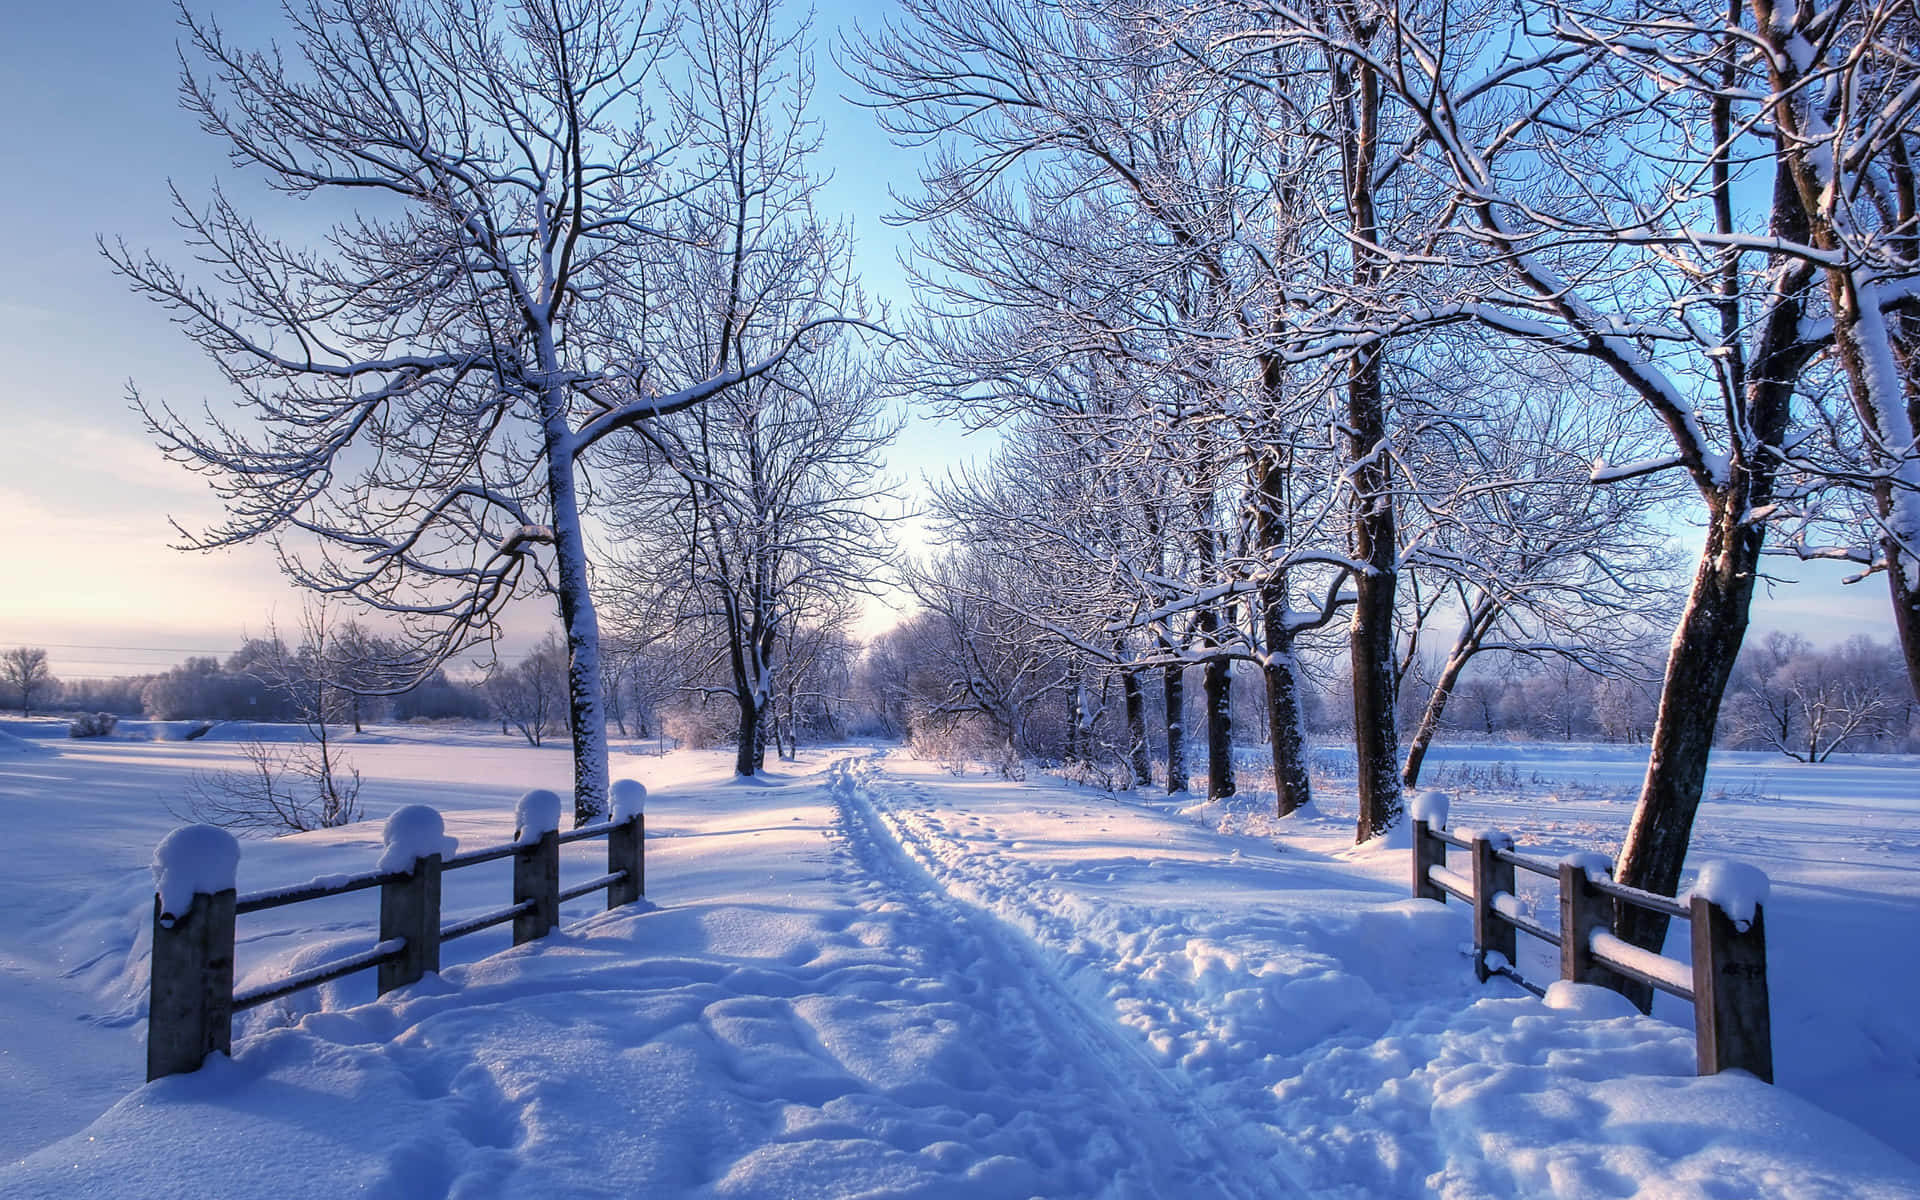 Enjoy a Winter Landscape with Magical Snow Wallpaper